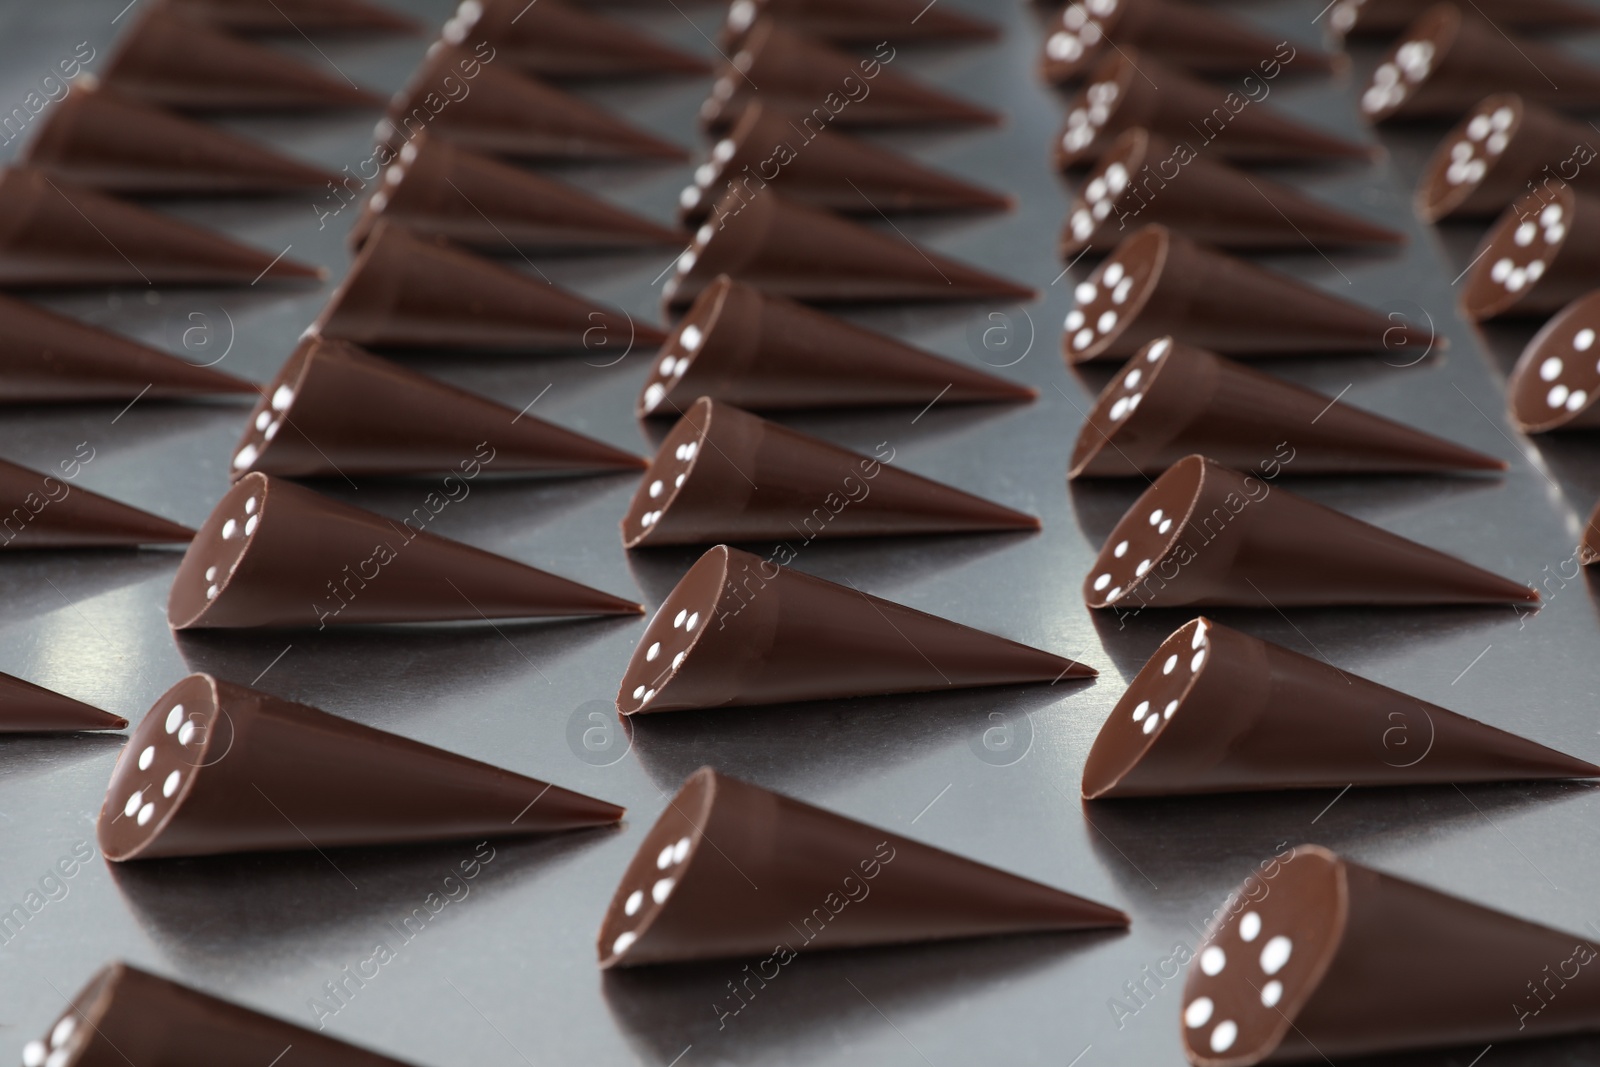 Photo of Many tasty chocolate candies on metal surface. Production line